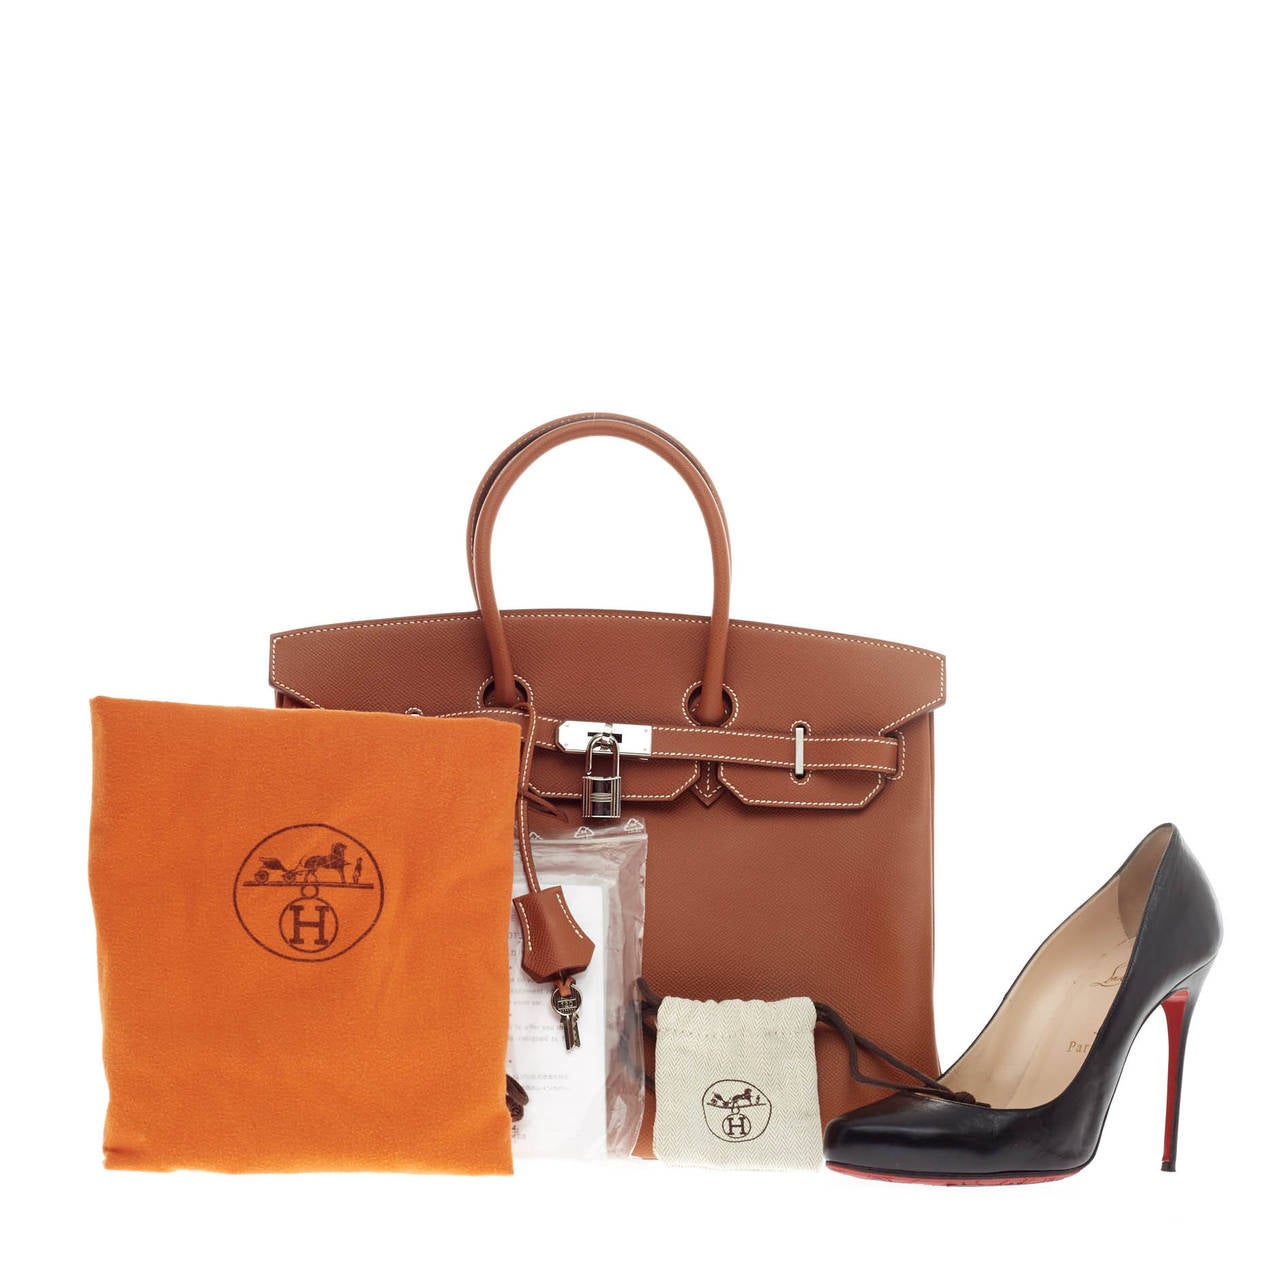 This authentic Hermes Birkin Gold Epsom Palladium Hardware 35 showcases Hermes' most beloved and classic design. Constructed in sturdy, scratch-resistant cross grain gold epsom leather with white contrast stitching, this stand-out neutral tote